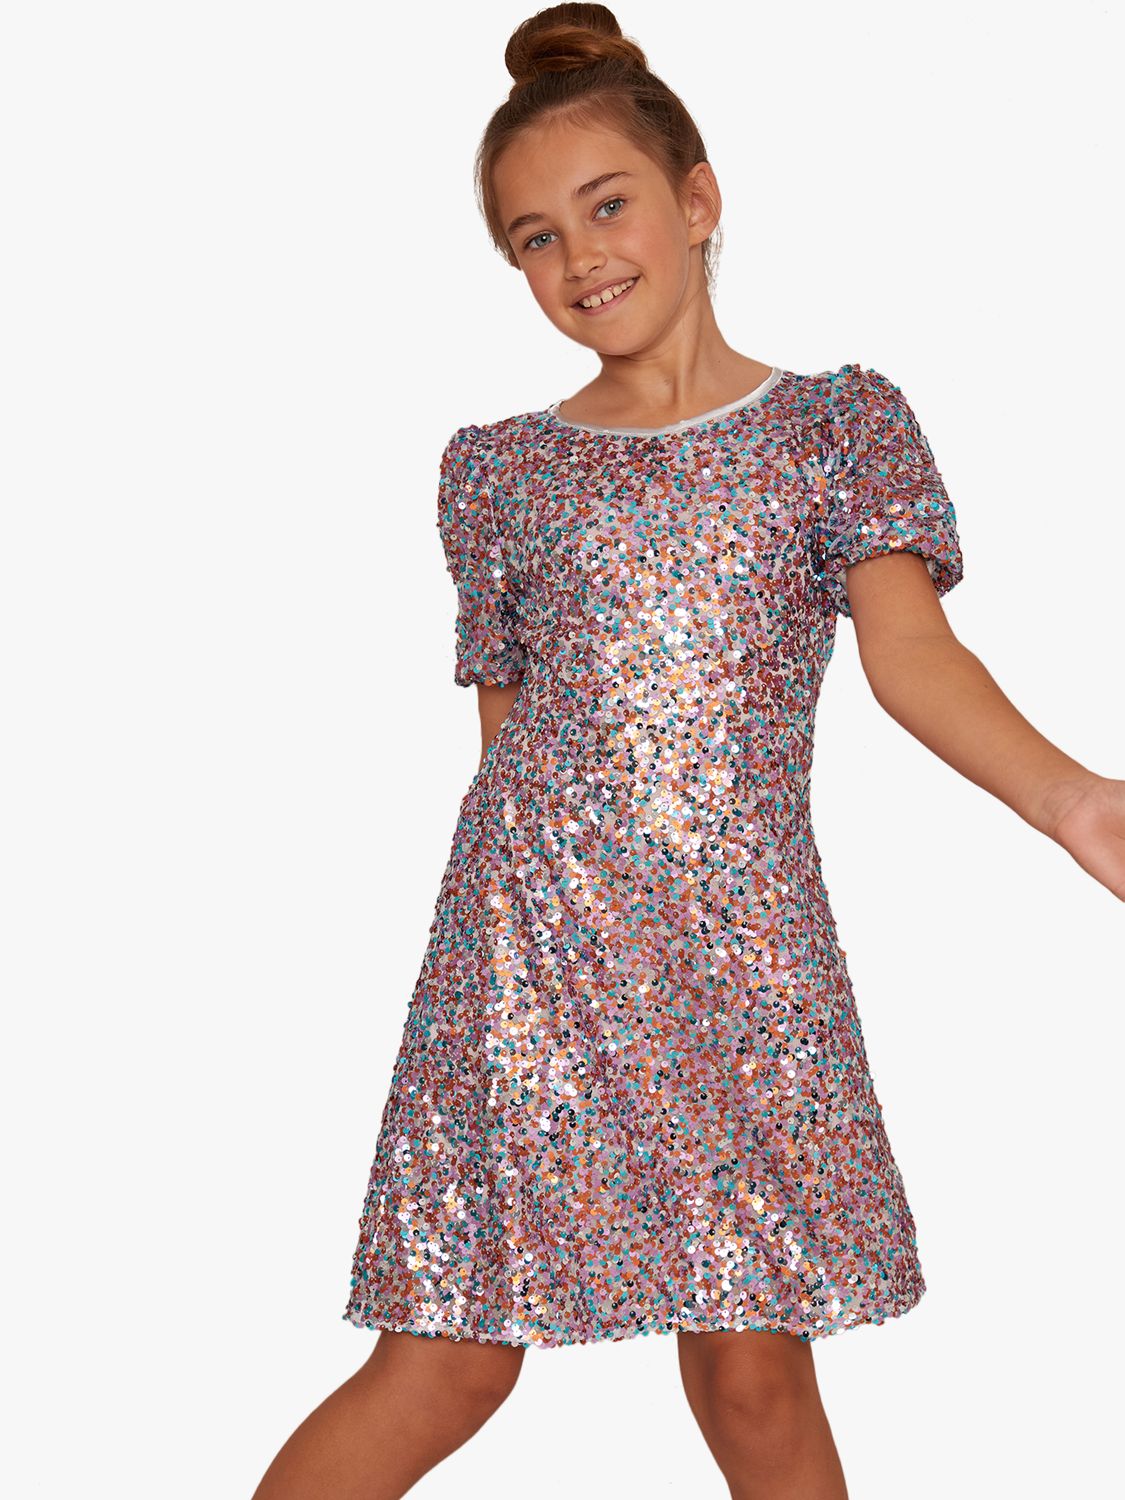 Image of Chi Chi London Girls Madelyn Glitter Party Dress Metallics